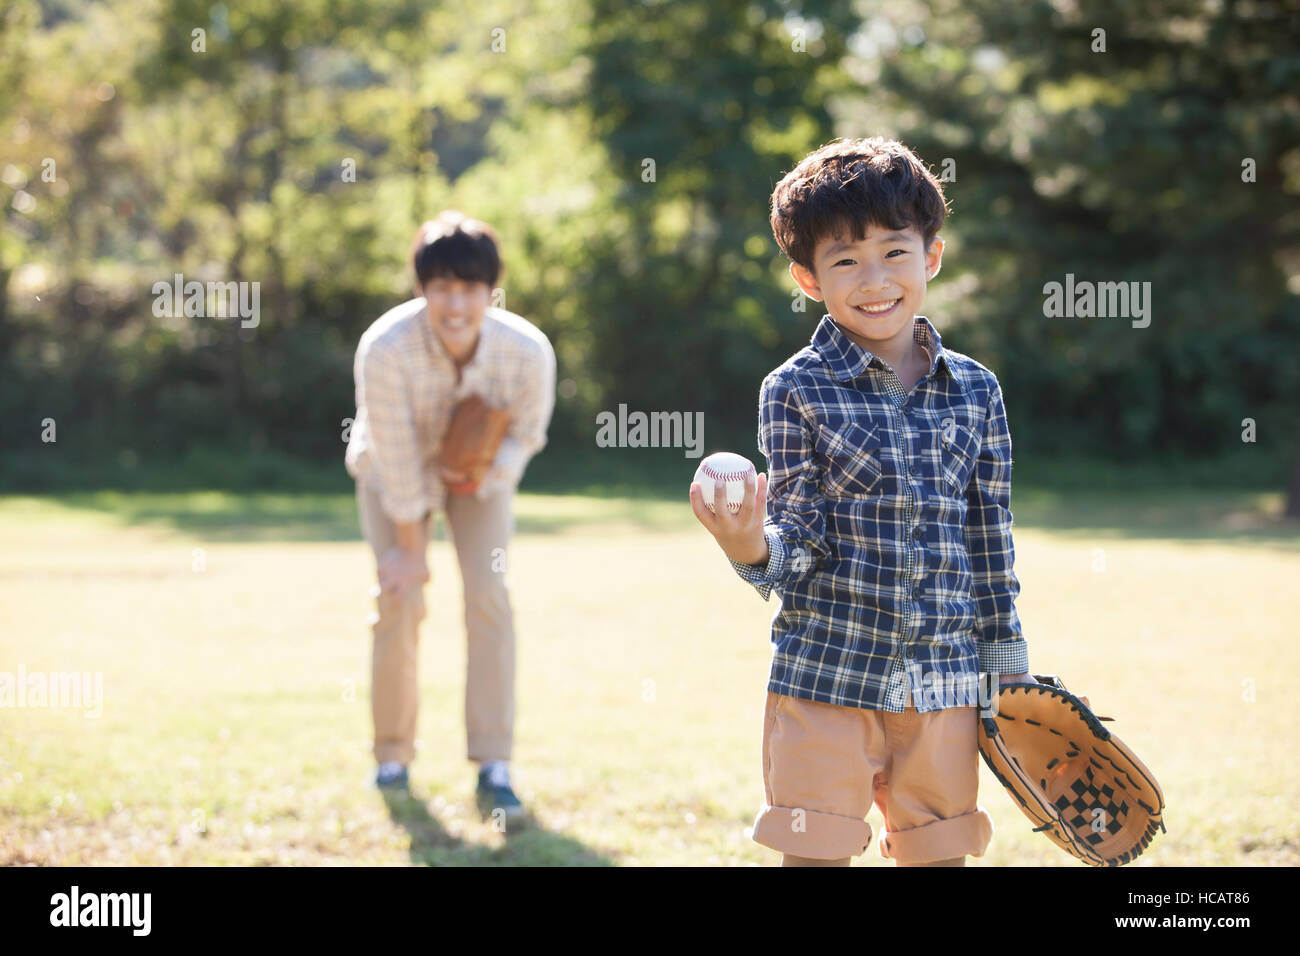 Smiling five-year-old boy with glove and baseball standing on grassland with his father behind him Stock Photo